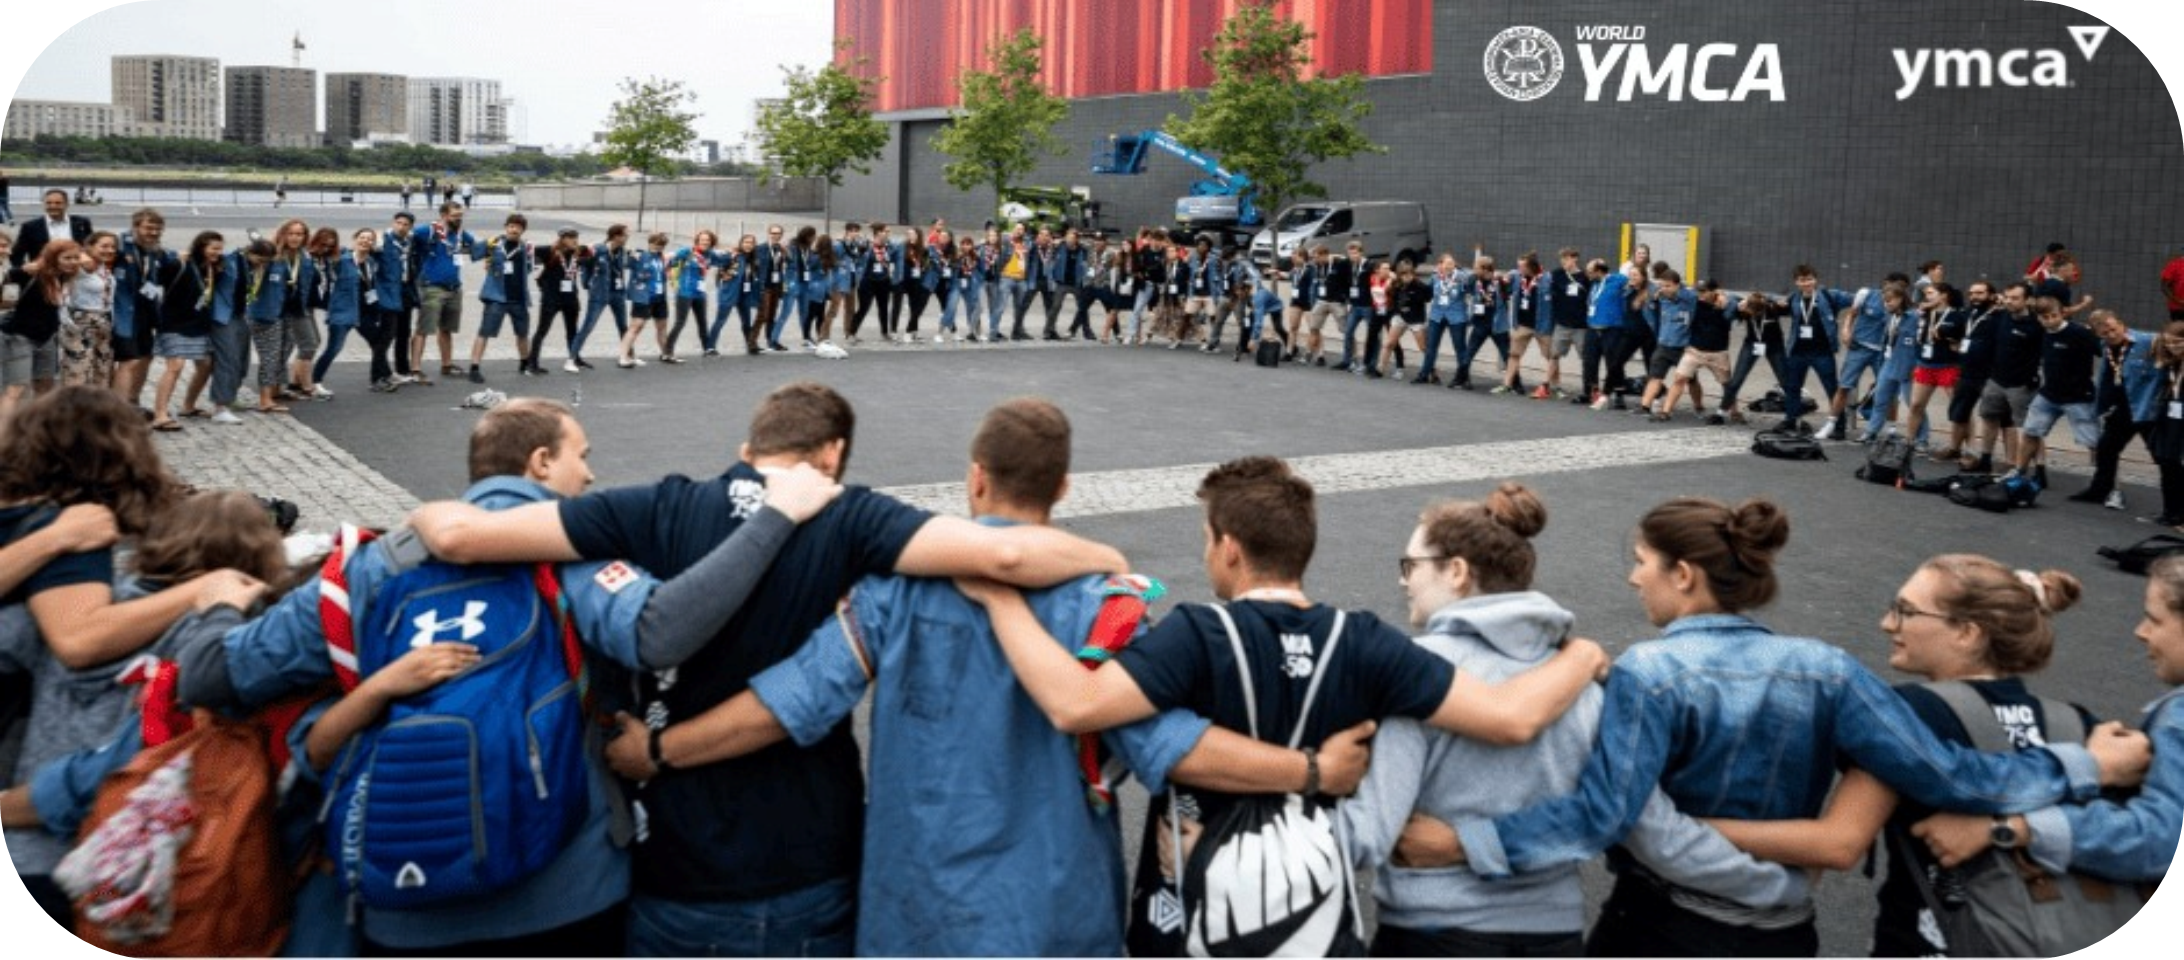 Image of people in a circle embracing around the World YMCA building in Ukraine